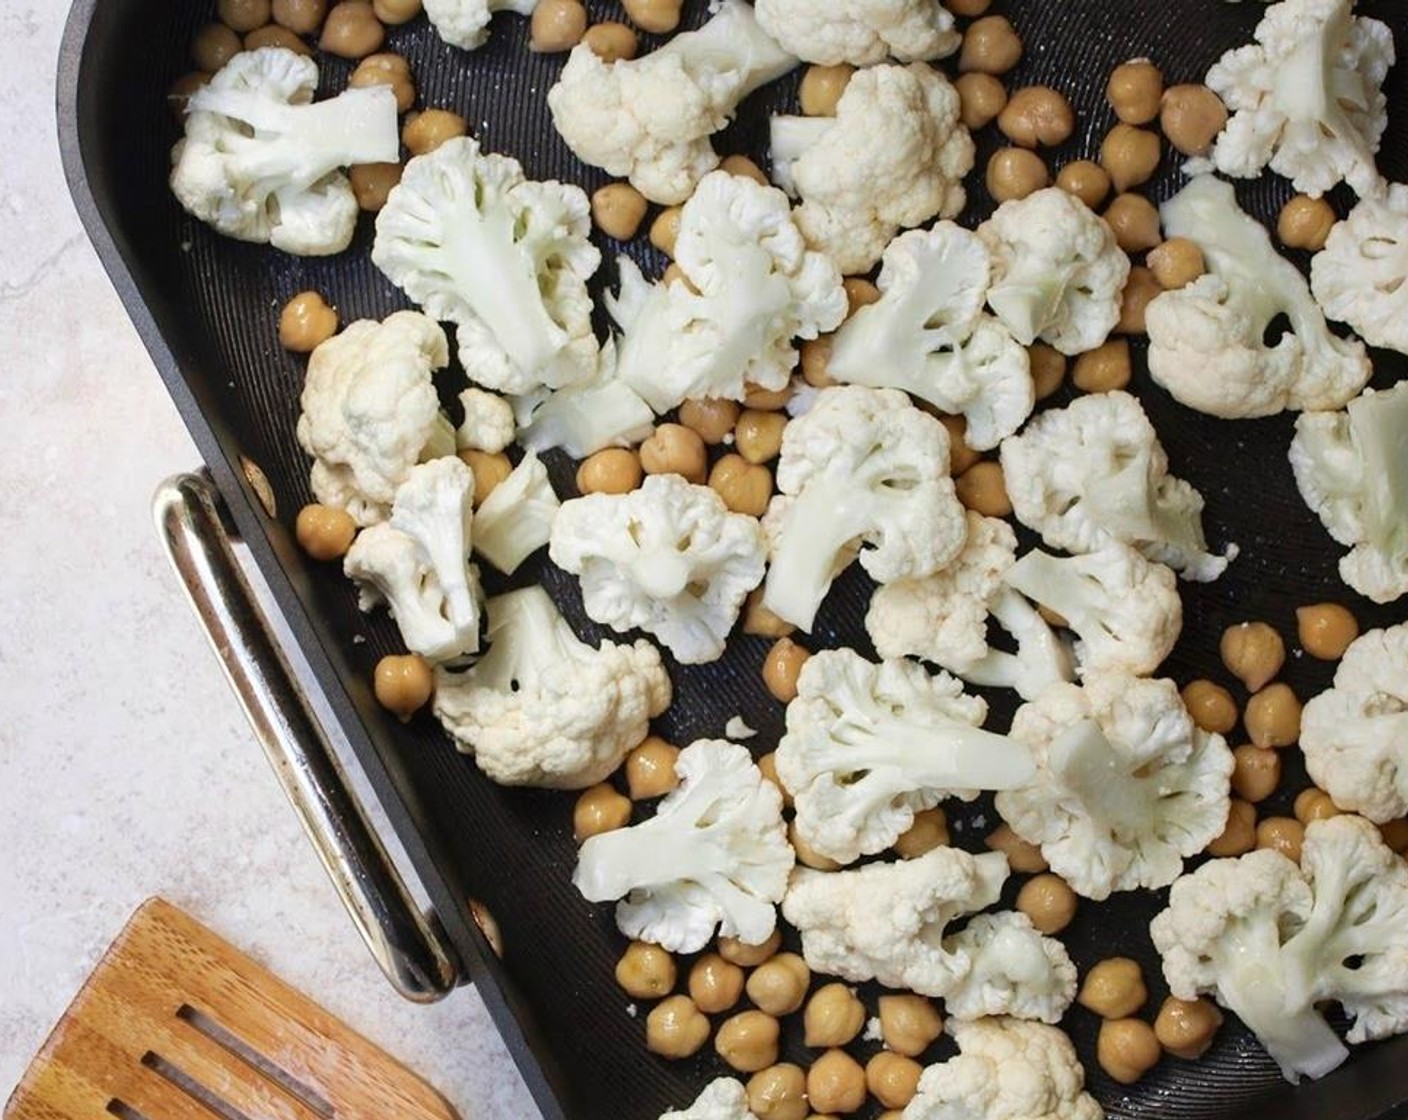 step 2 Toss the Chickpeas (1 can) and Cauliflower (1) together in a large roasting pan with Olive Oil (1 Tbsp) and dash or two of Mineral Salt (to taste). Roast for 45 minutes, stirring every 15 minutes or so.